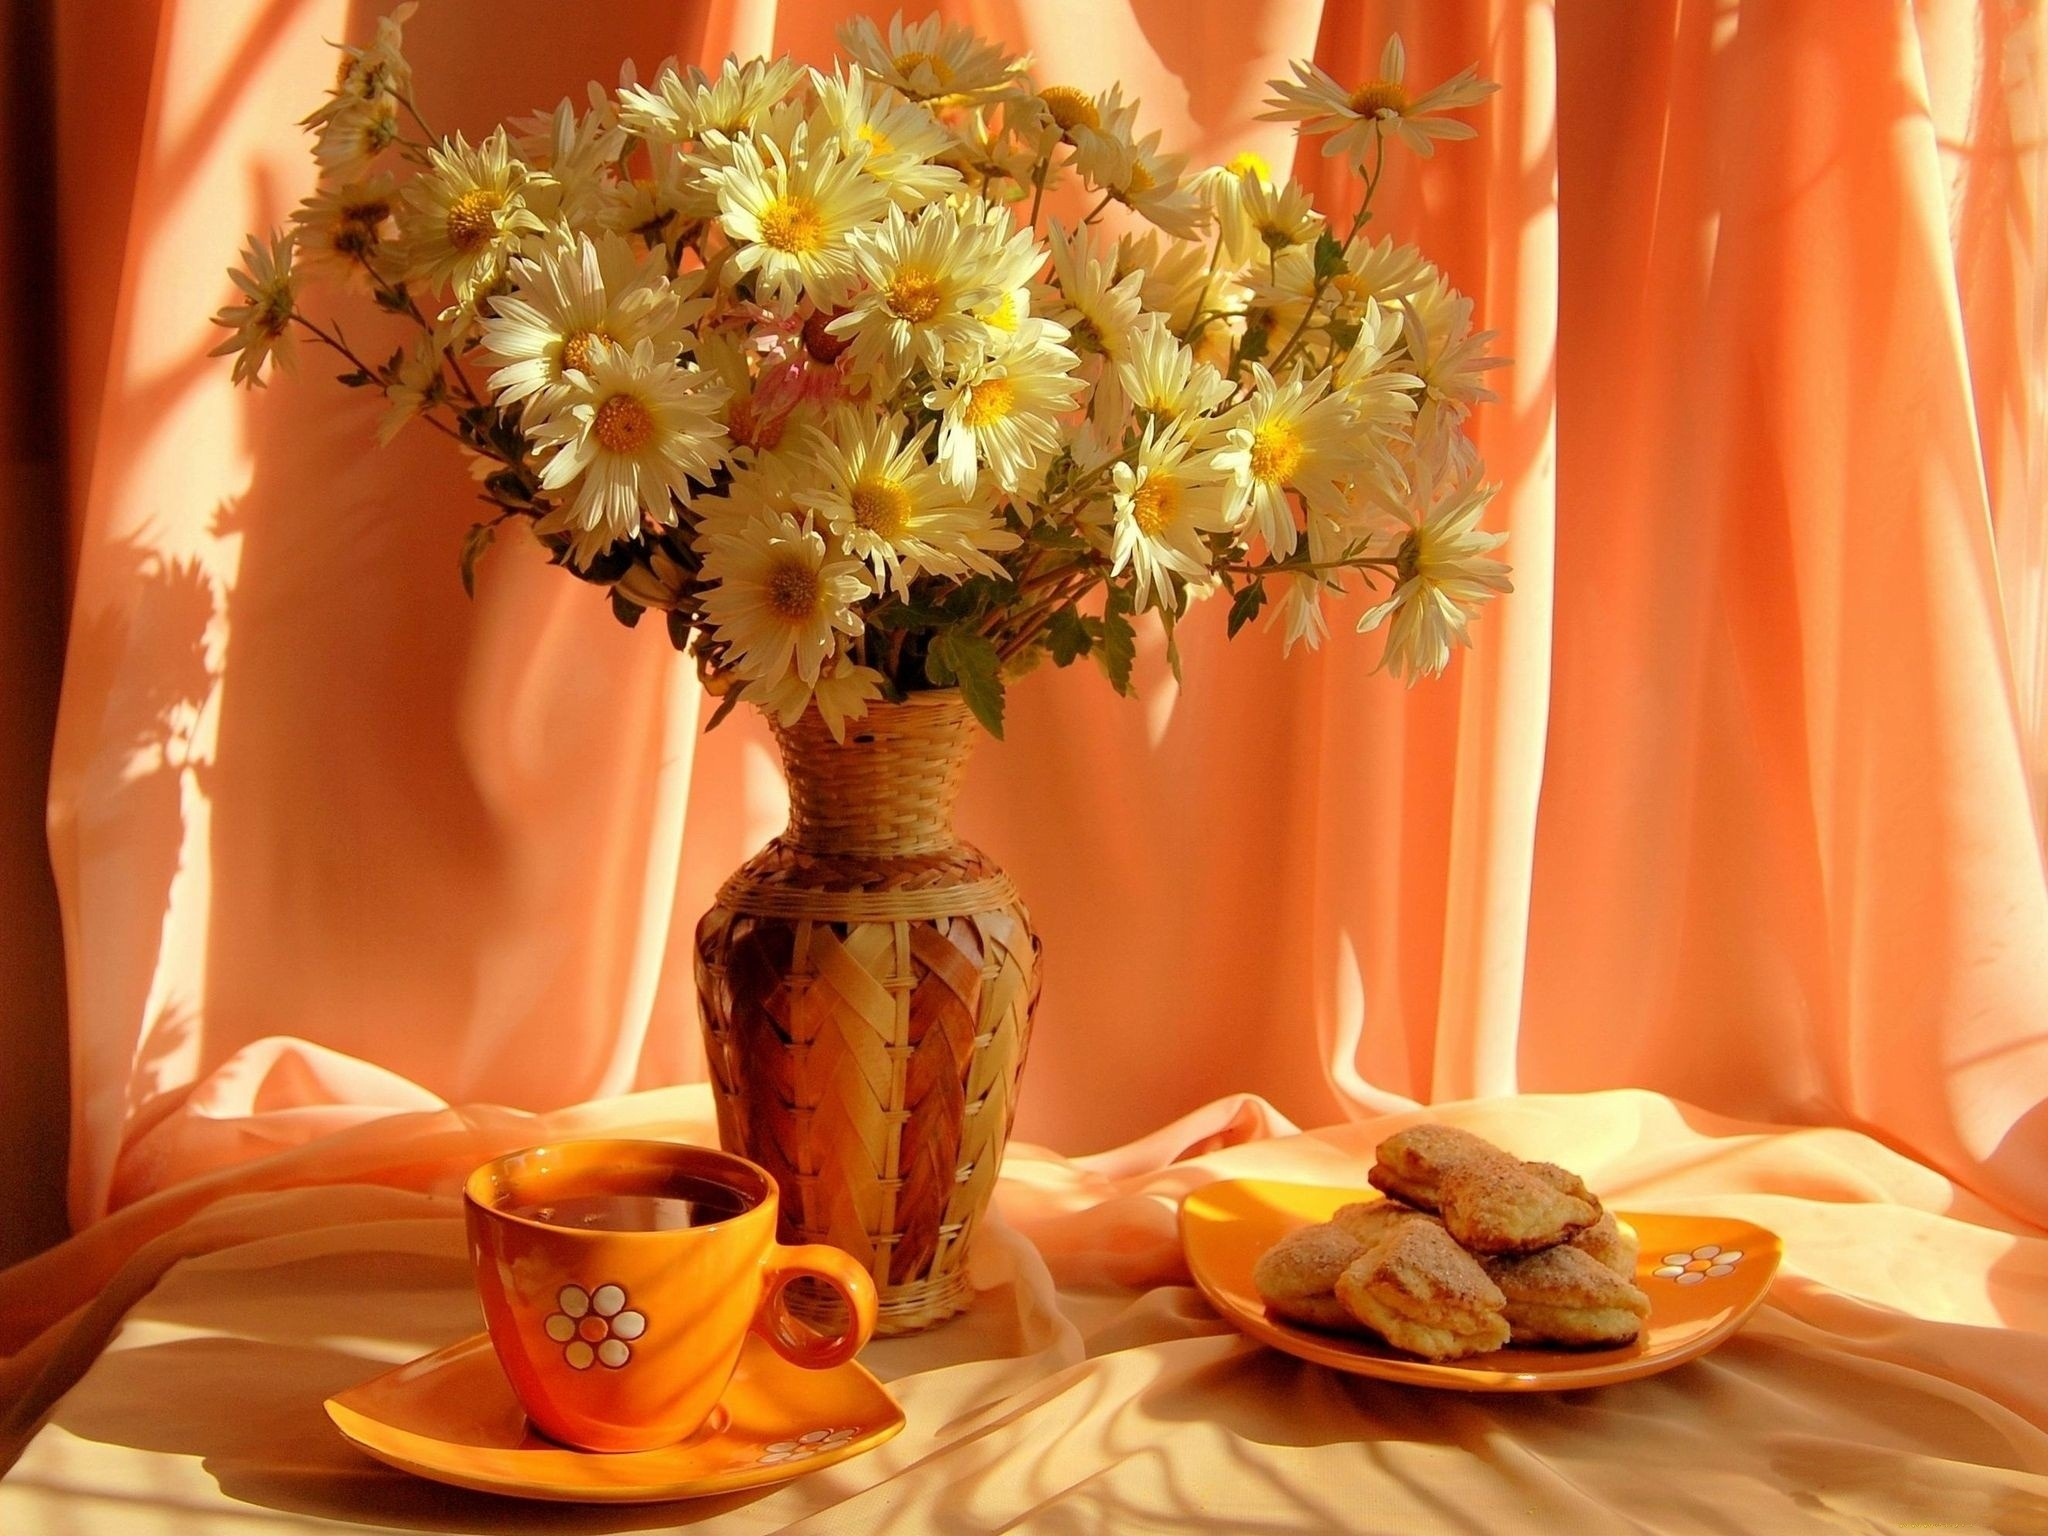 Cookie Cup Daisy Flower Plate Still Life Vase 2048x1536